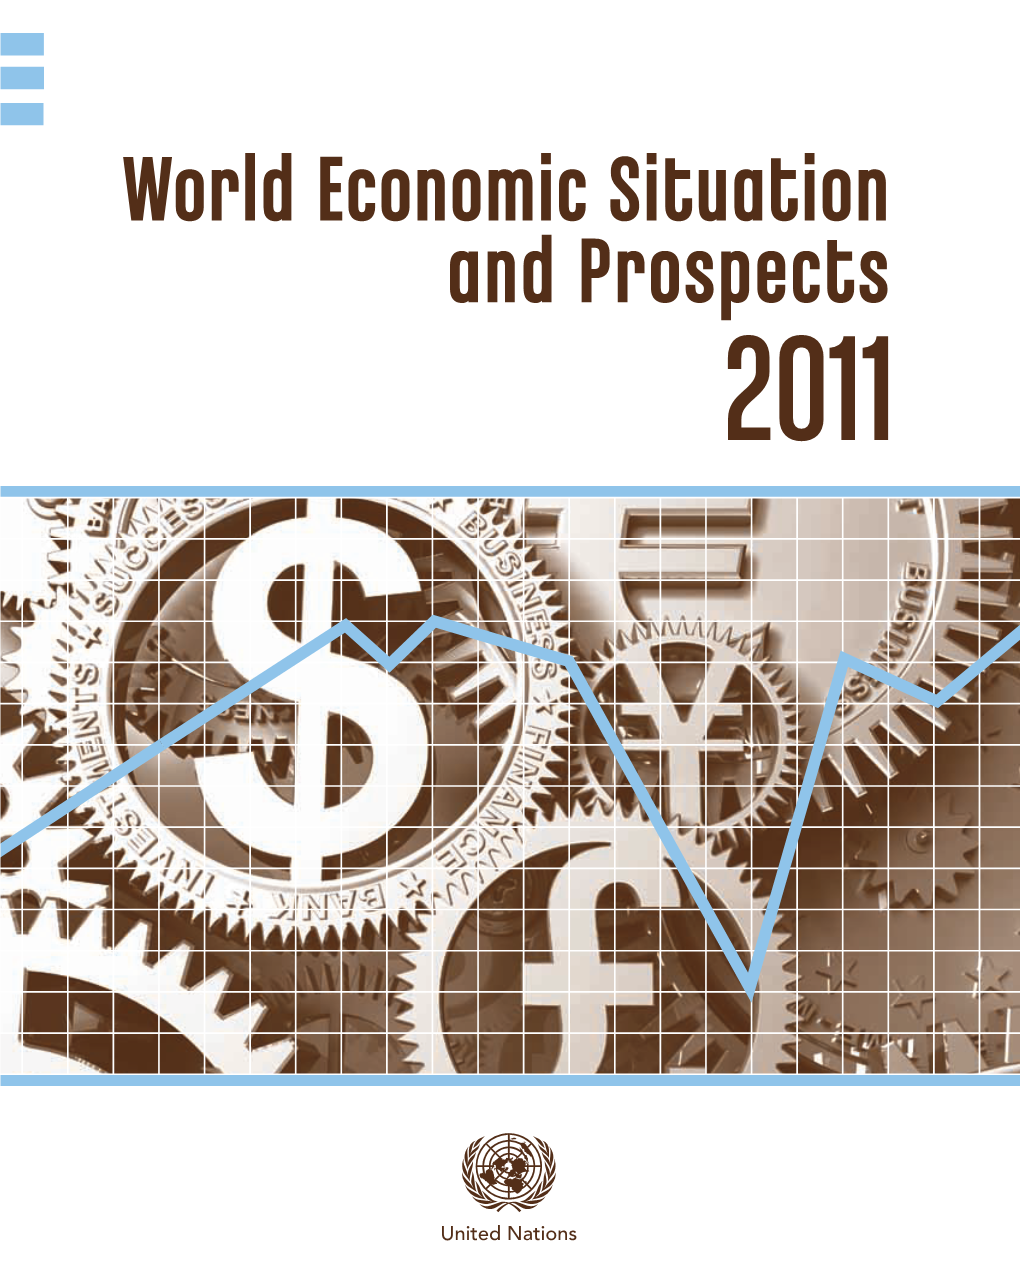 World Economic Situation and Prospects 2011 Prospects and Situation Economic World World Economic Situation and Prospects